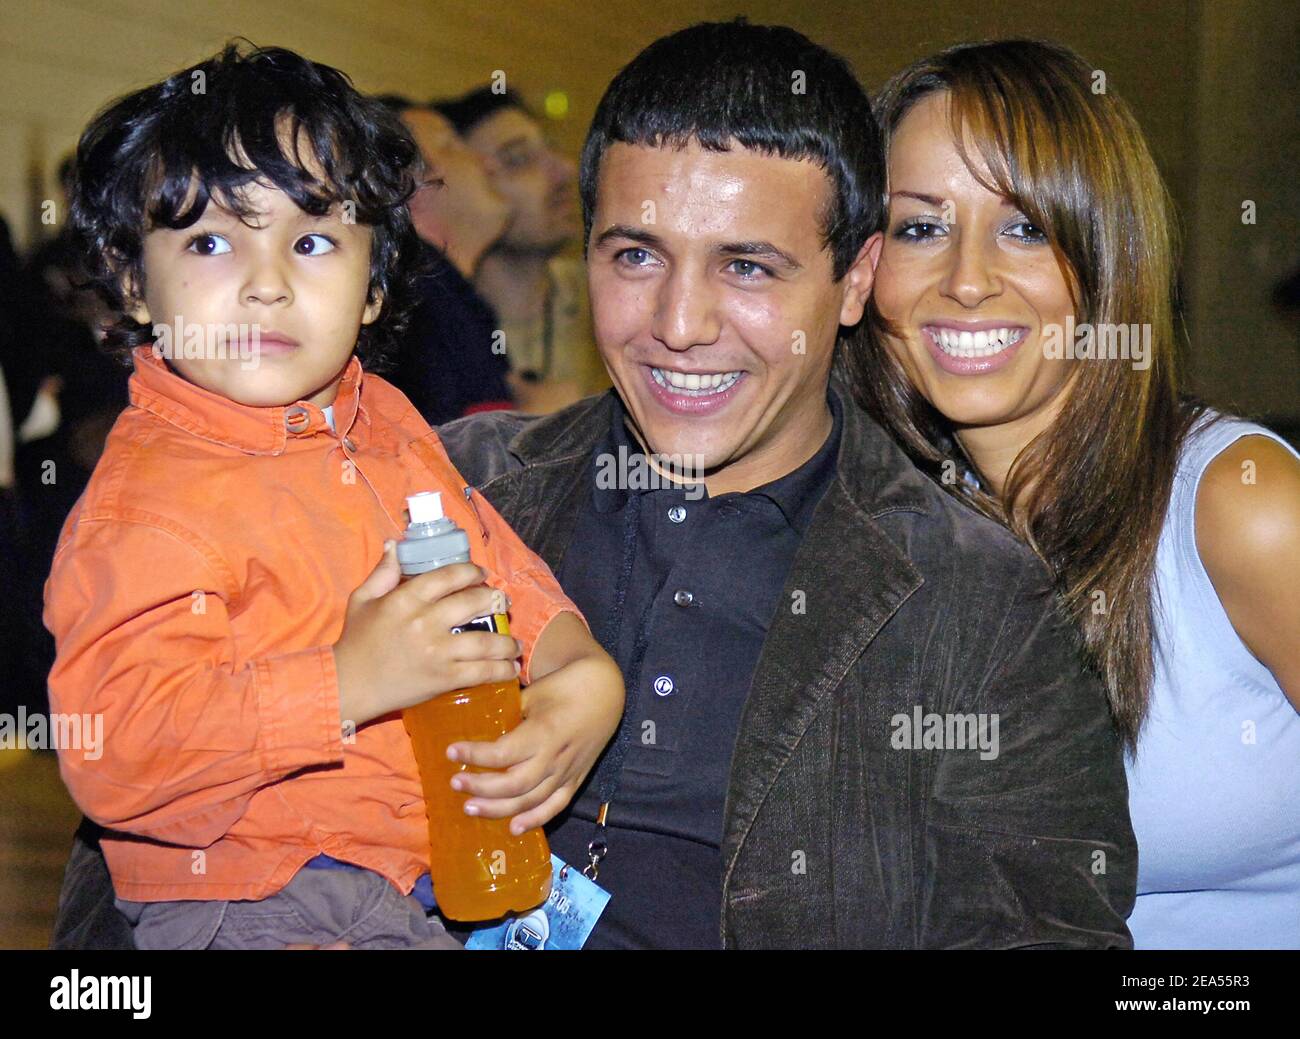 French singer Faudel with his wife Anissa and his son Anzy at French basket player Tony Parker of San Antonio Spurs and Powerade show in Issy-les-Moulineaux, near Paris, in France, on September 27, 2005. Photo by Nicolas Gouhier /CAMELEON/ABACAPRESS.COM Stock Photo